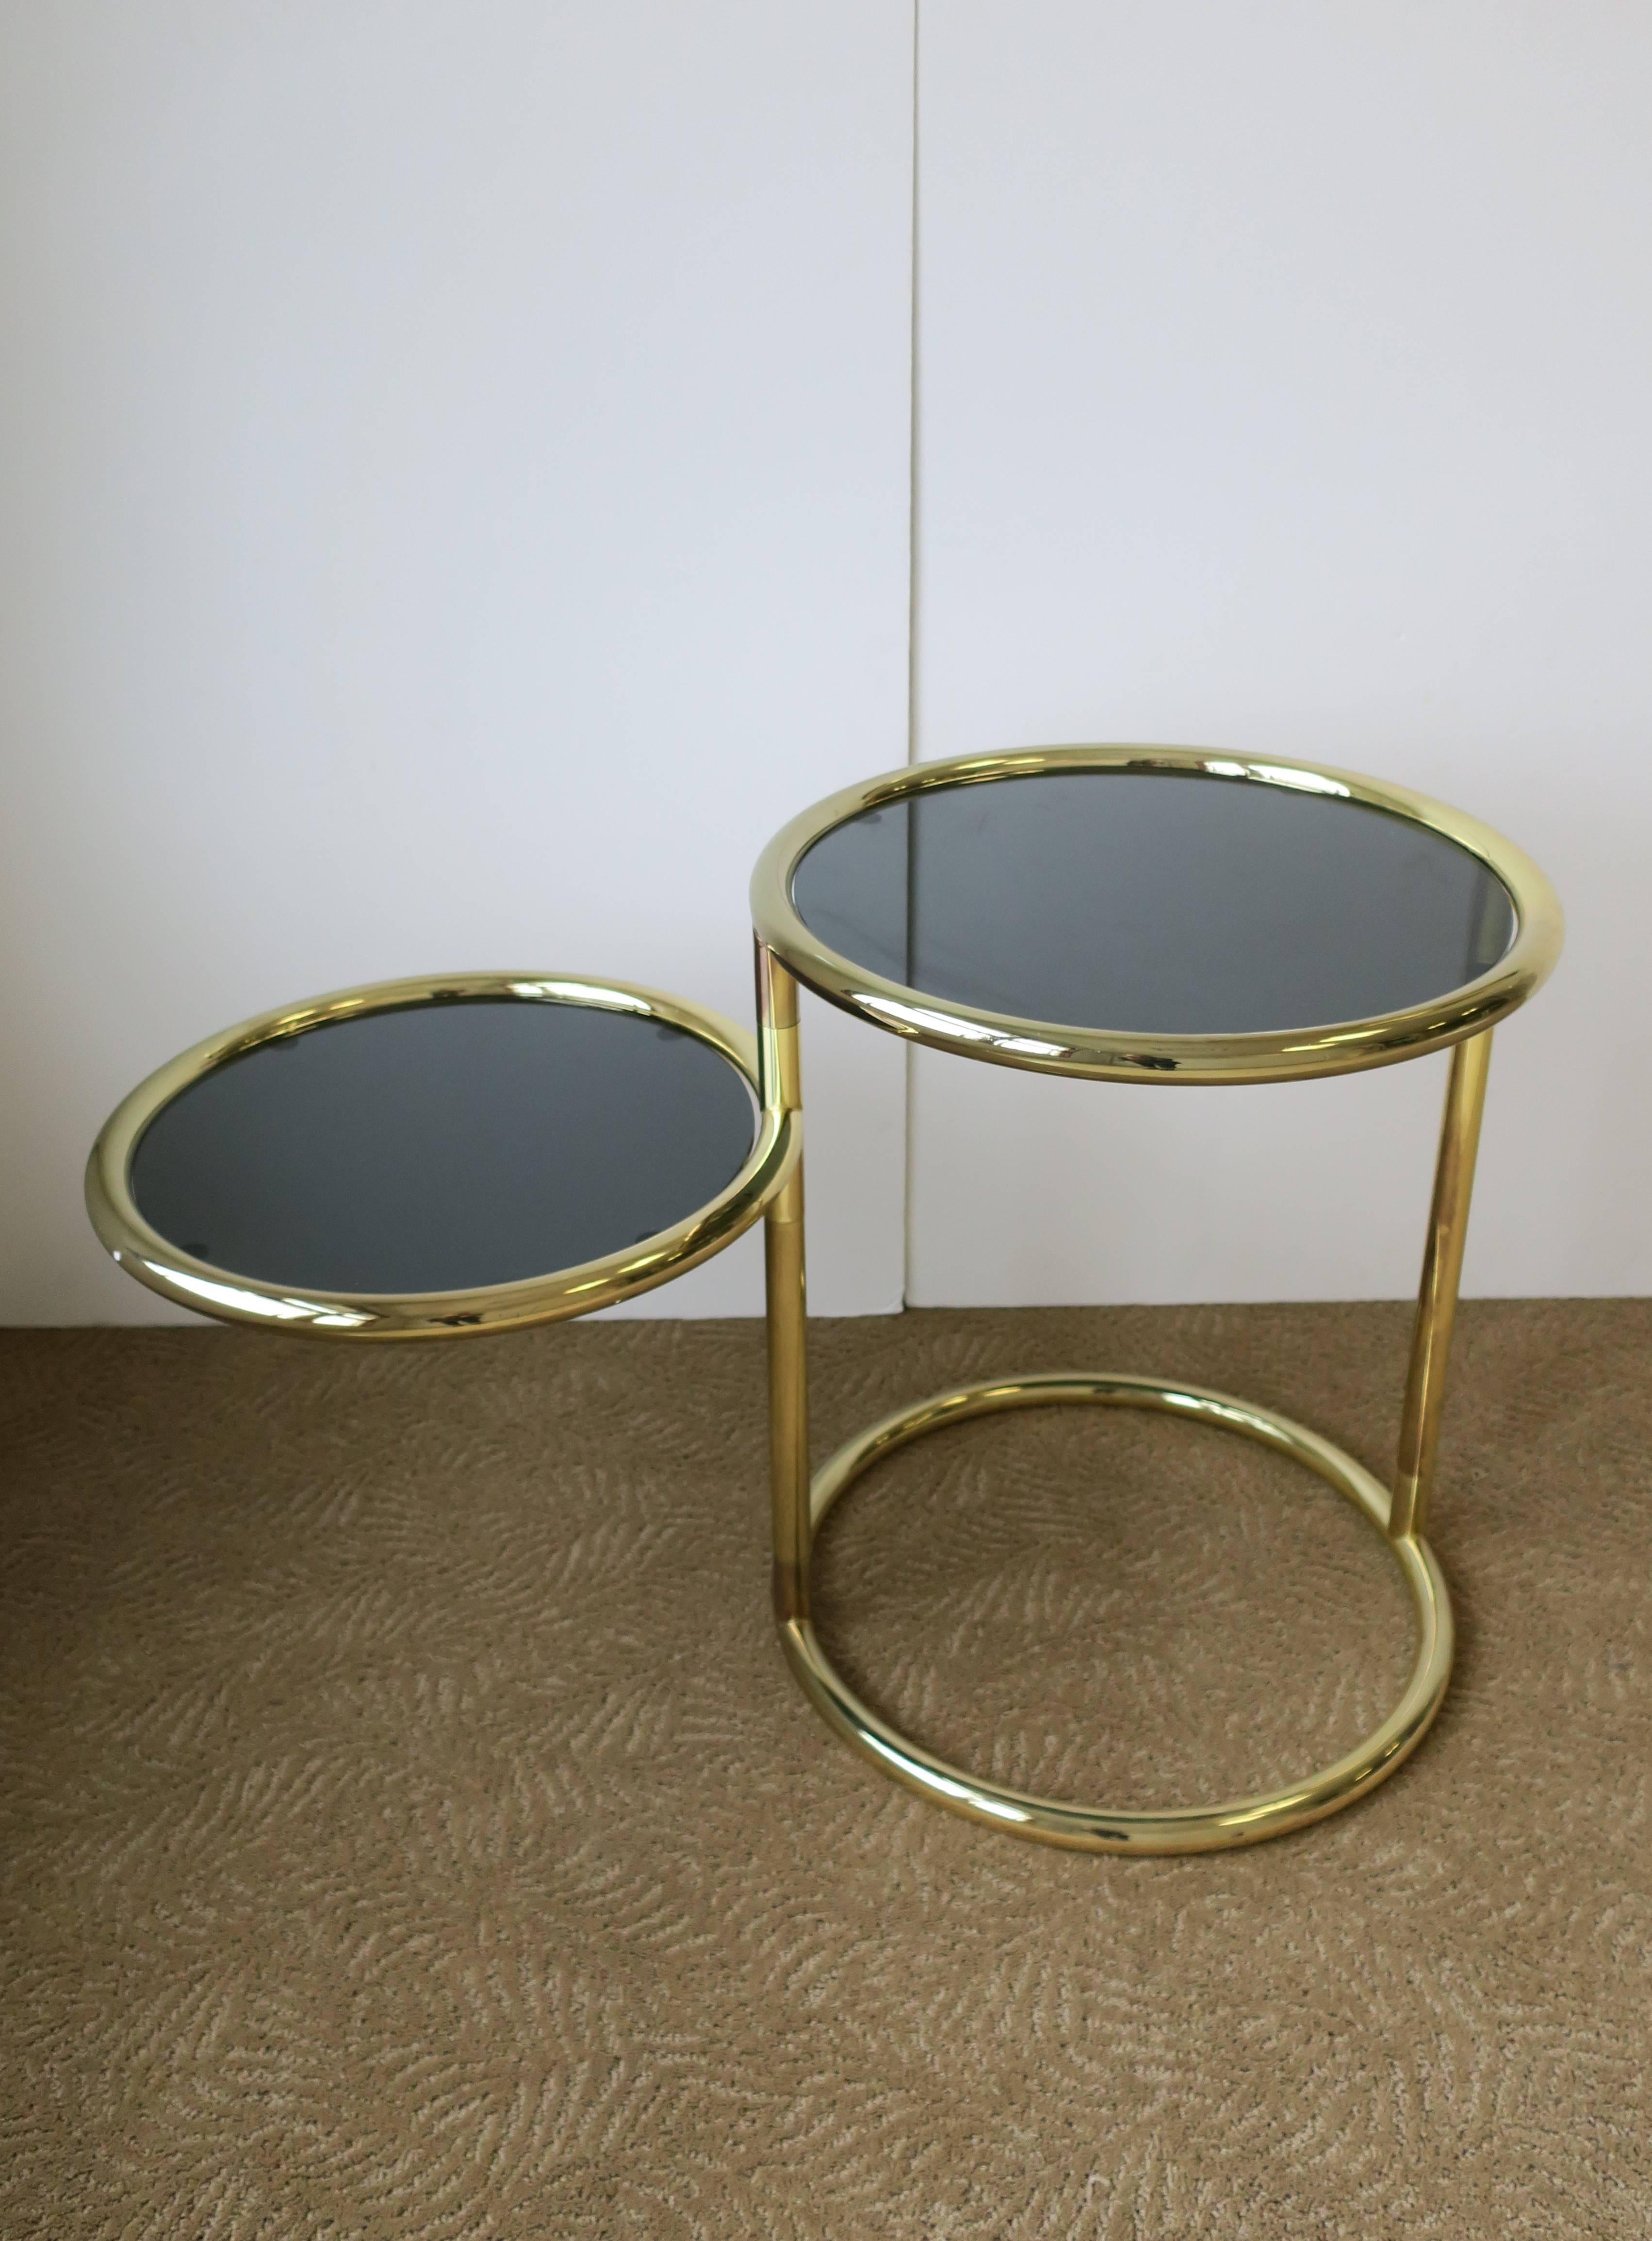 Late 20th Century Modern Swivel Round Brass and Glass Side Table After Milo Baughman, ca. 1970s